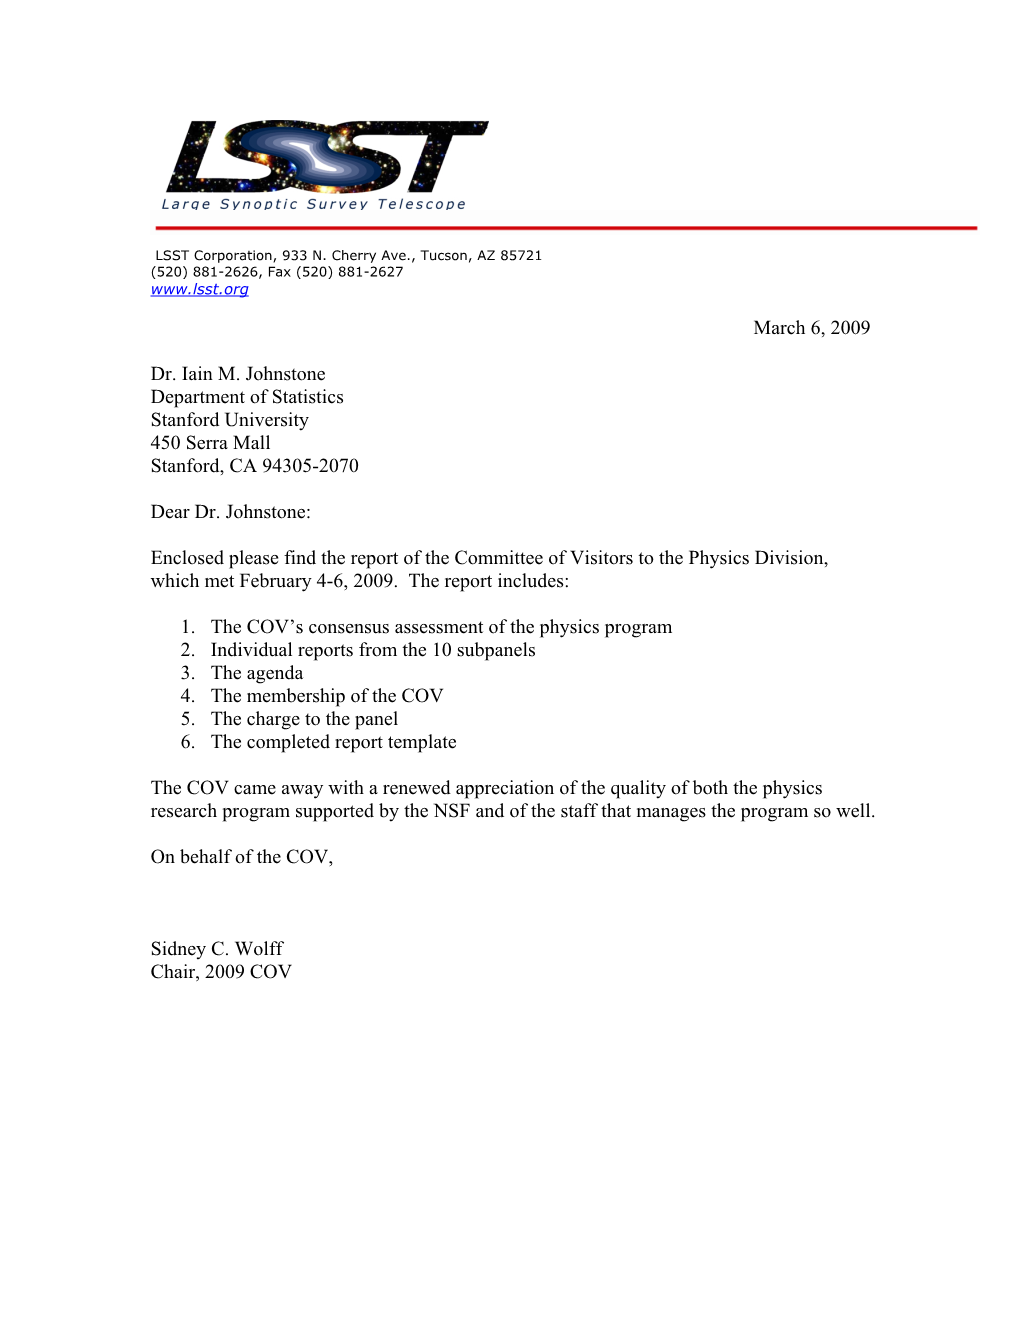 Report of the Committee of Visitors to the Physics Division, Which Met February 4-6, 2009